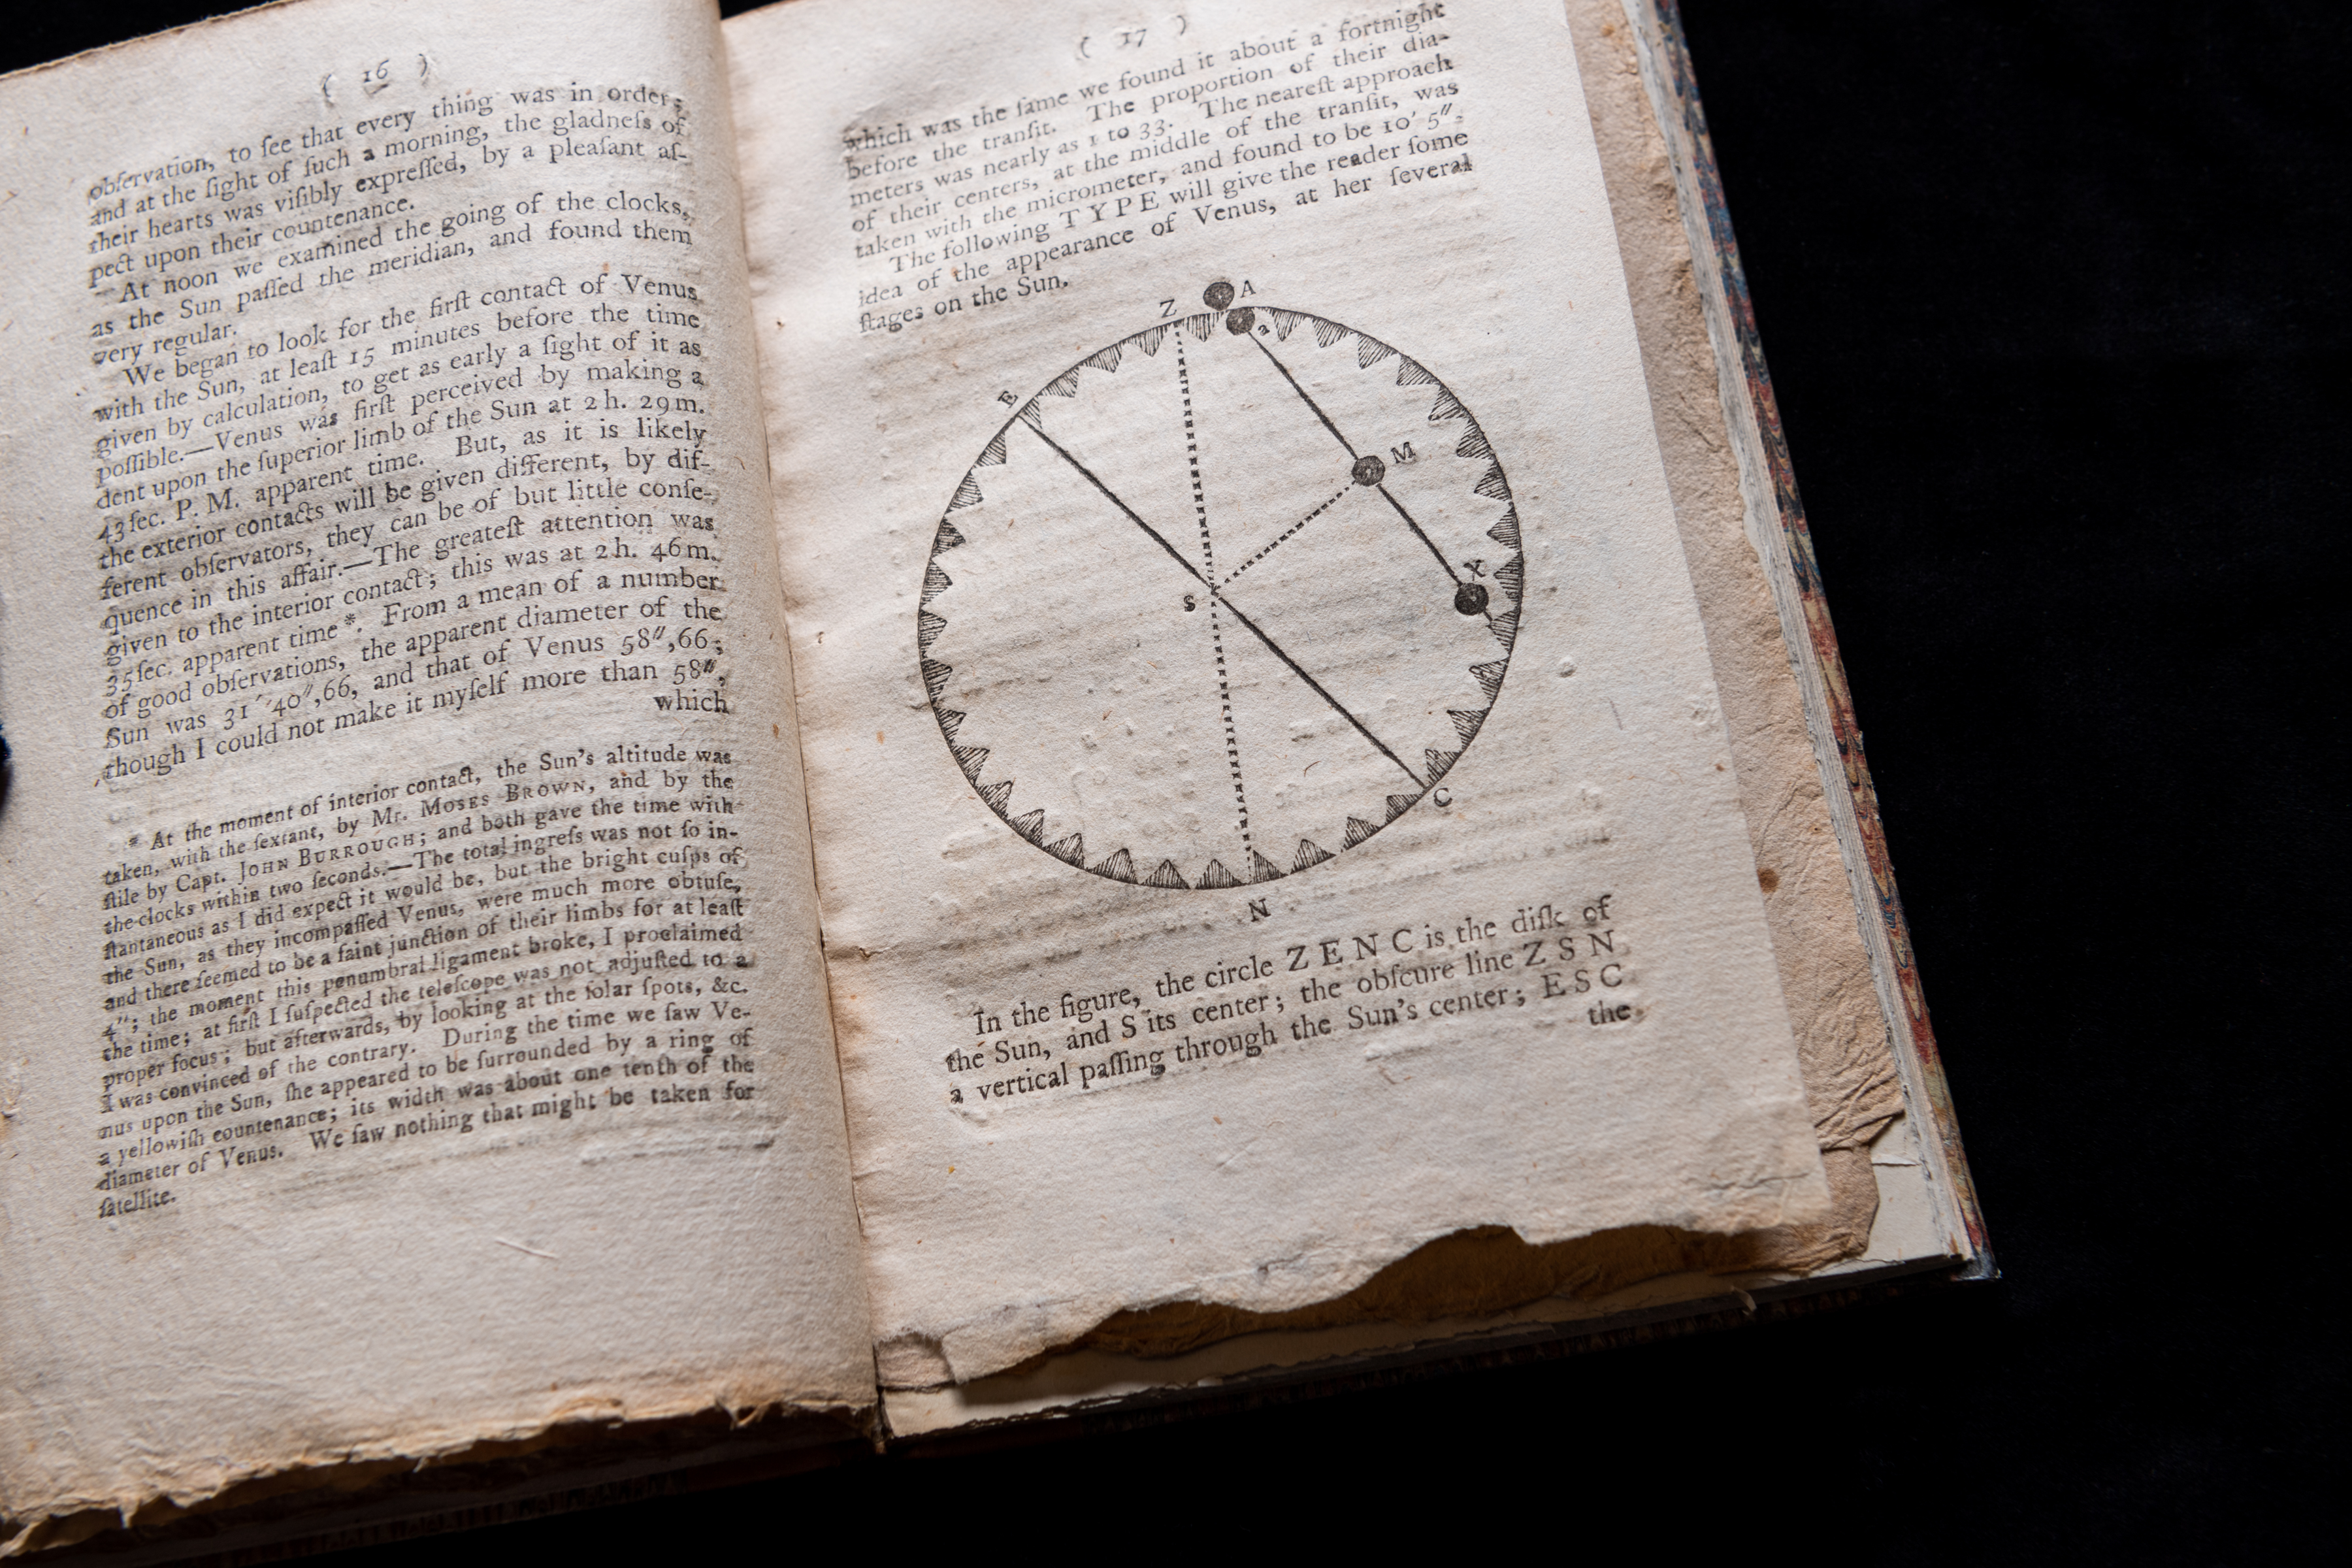 Detail of a printed text shows an astronomical circular diagram and text in English.